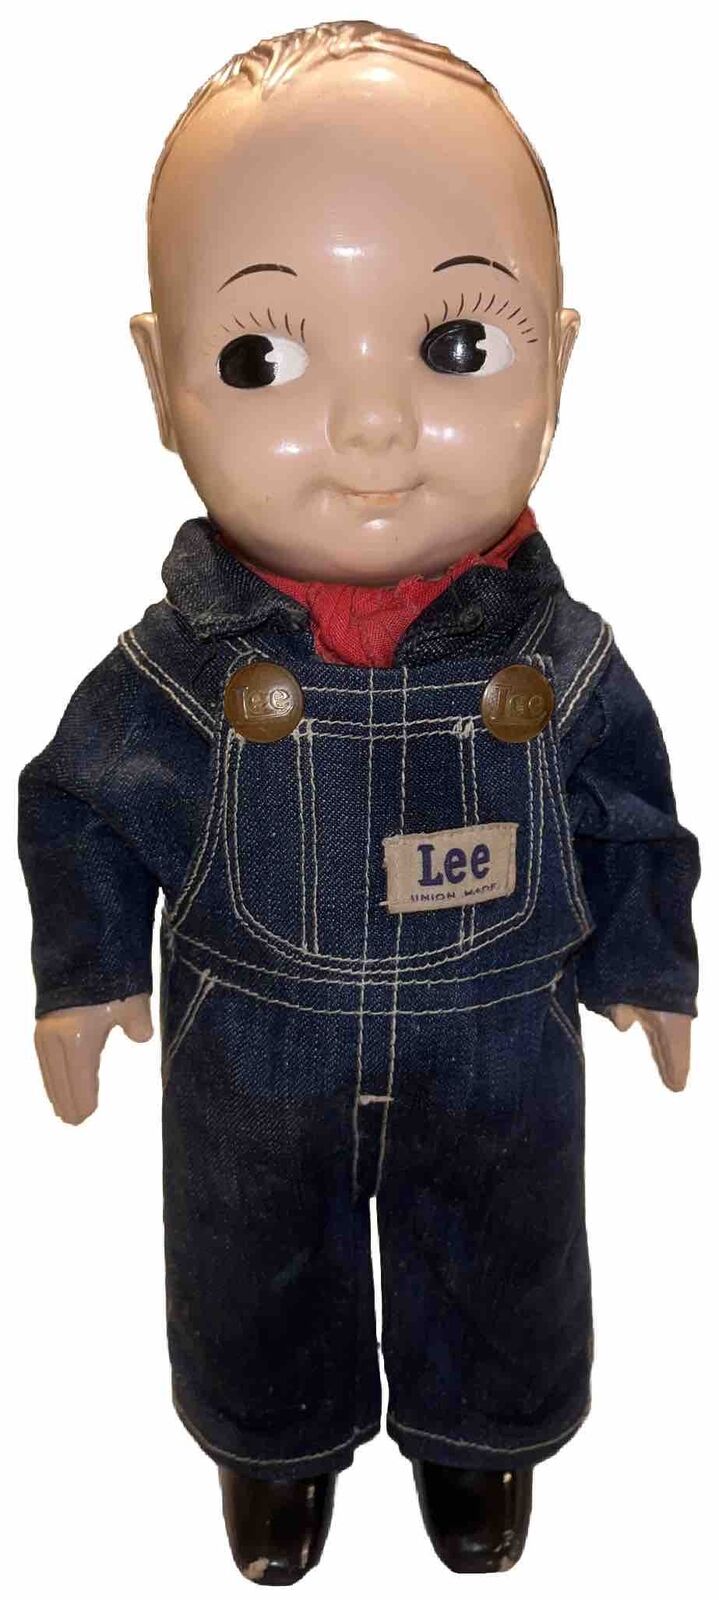 Vintage Buddy Lee Doll 1950's. Railroad Engineer/Union Made Denim Overall NO HAT